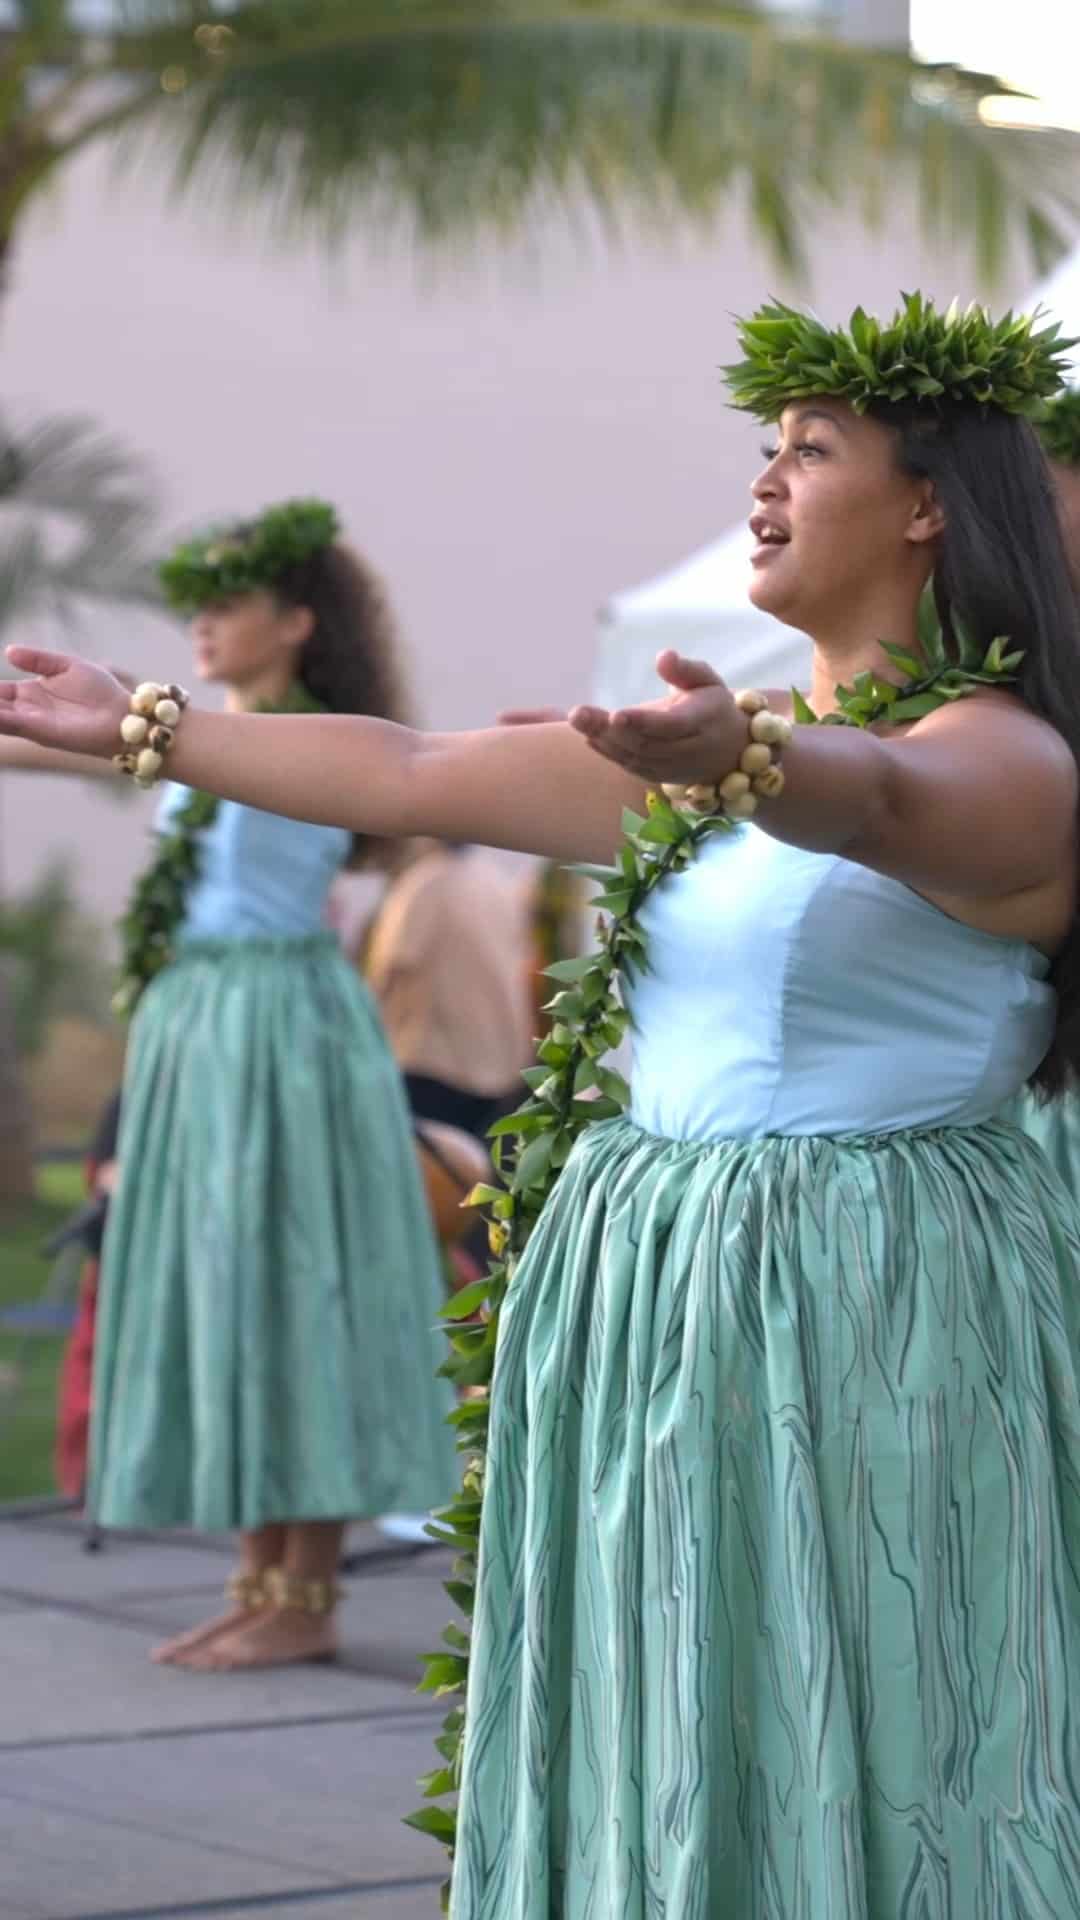 Join us for the return of Kona Nui Nights on Wednesday, June 7, 6pm - 8pm at Victoria Ward Park. Enjoy live music from @eineimusic and a celebration of hula and storytelling by Halau Hi’iakaināmakalehua, Kumu Robert Keano Ka’upu IV and Lono Padilla. Learn more at the link in our bio.